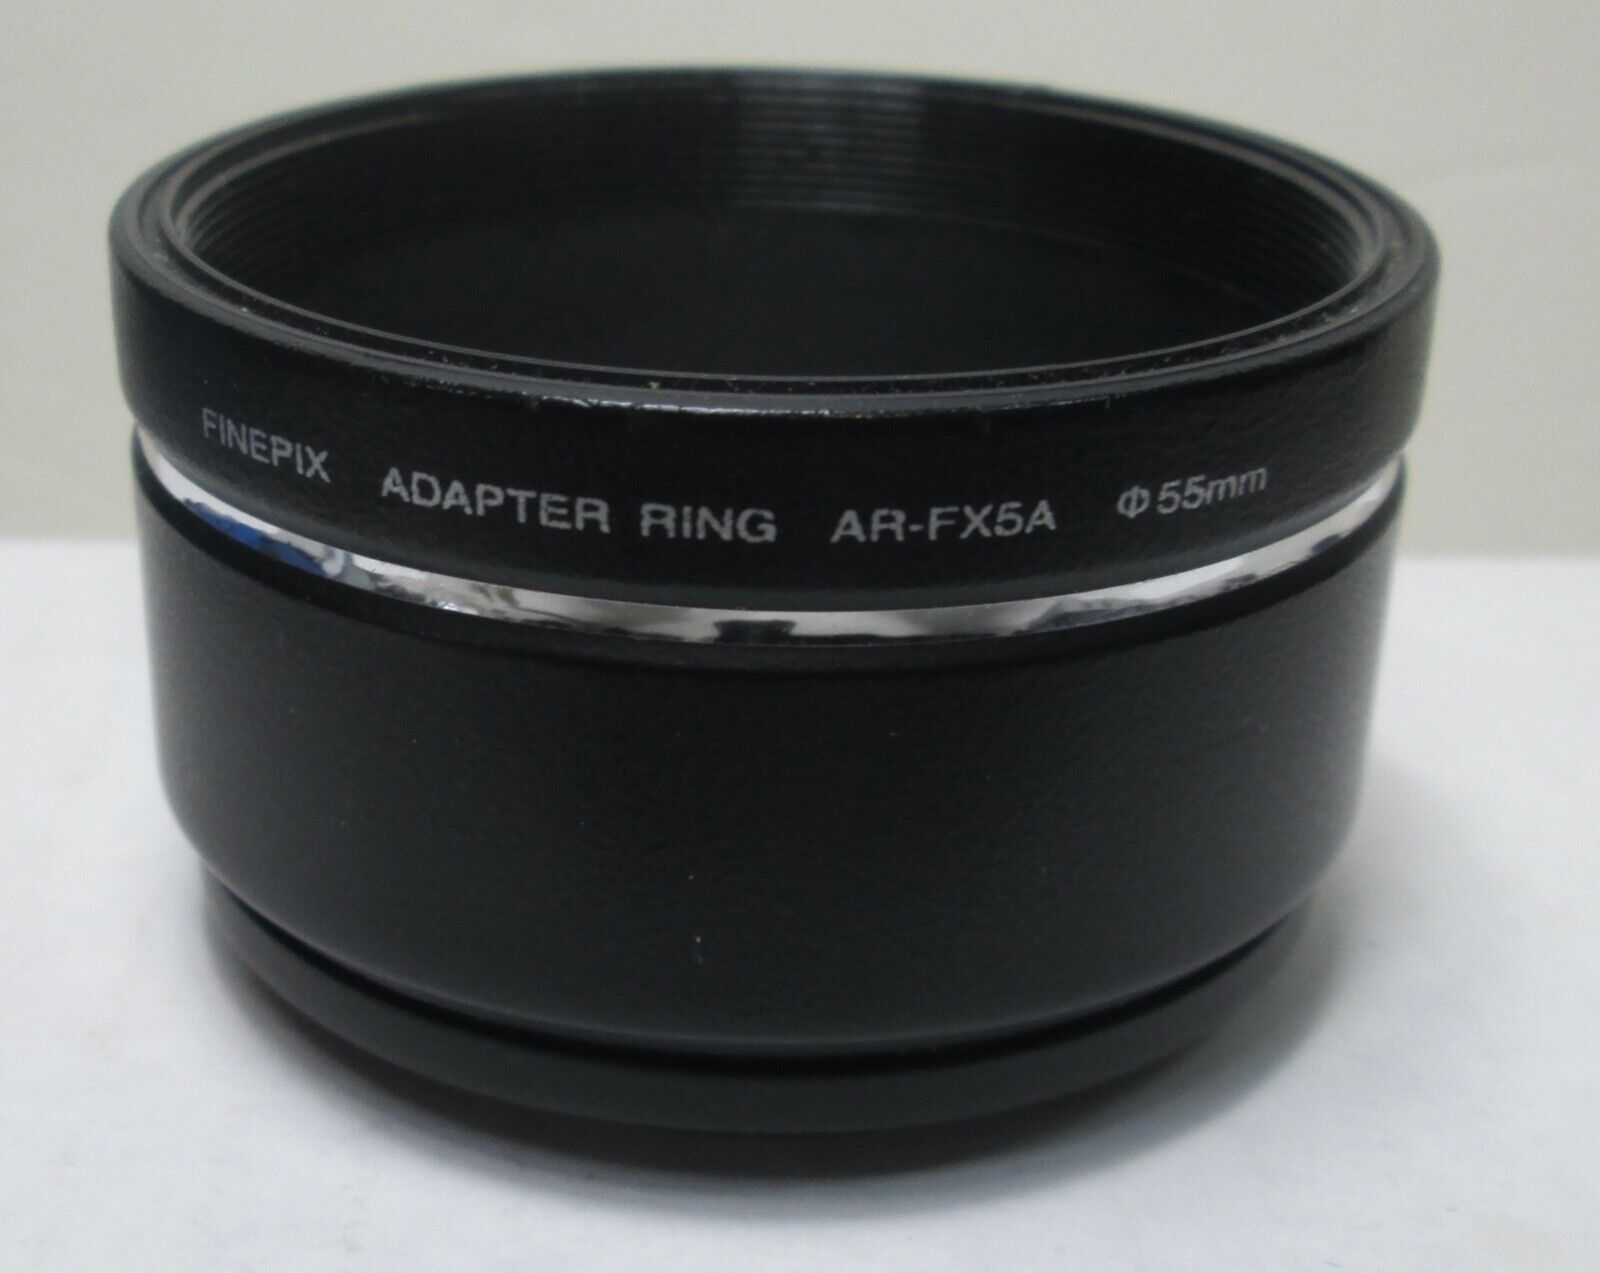 Adapter Ring AR-FX5A from 49mm to 55mm Lens hood Shade Fujifilm Finepix S5100 - $8.54